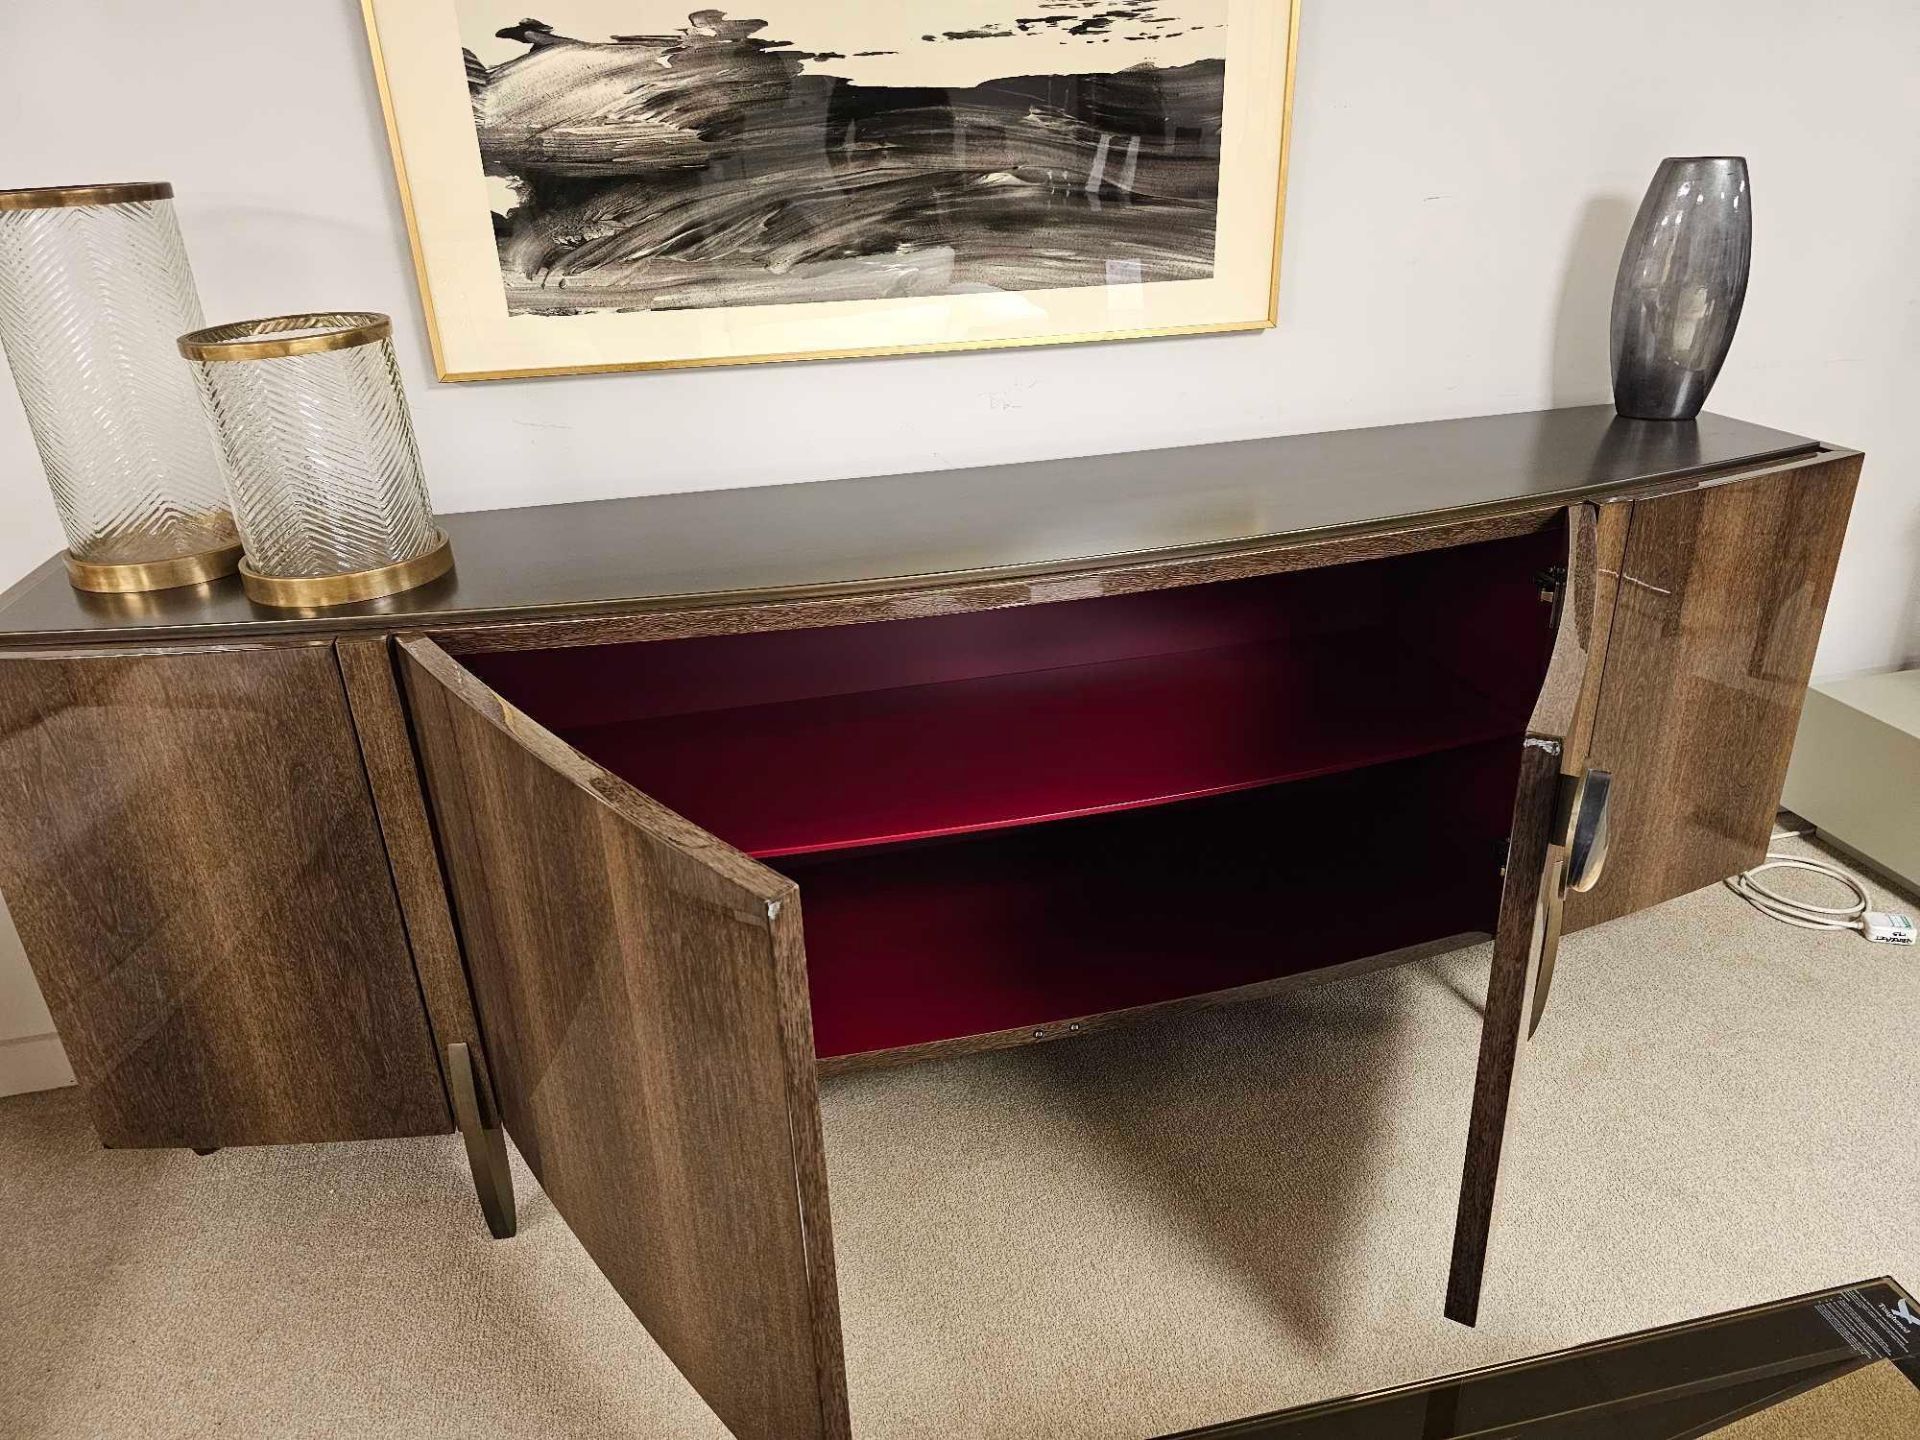 Fashion Affair Large Sideboard by Telemaco for Malerba The Buffet, for the living room, is shaped by - Bild 24 aus 25